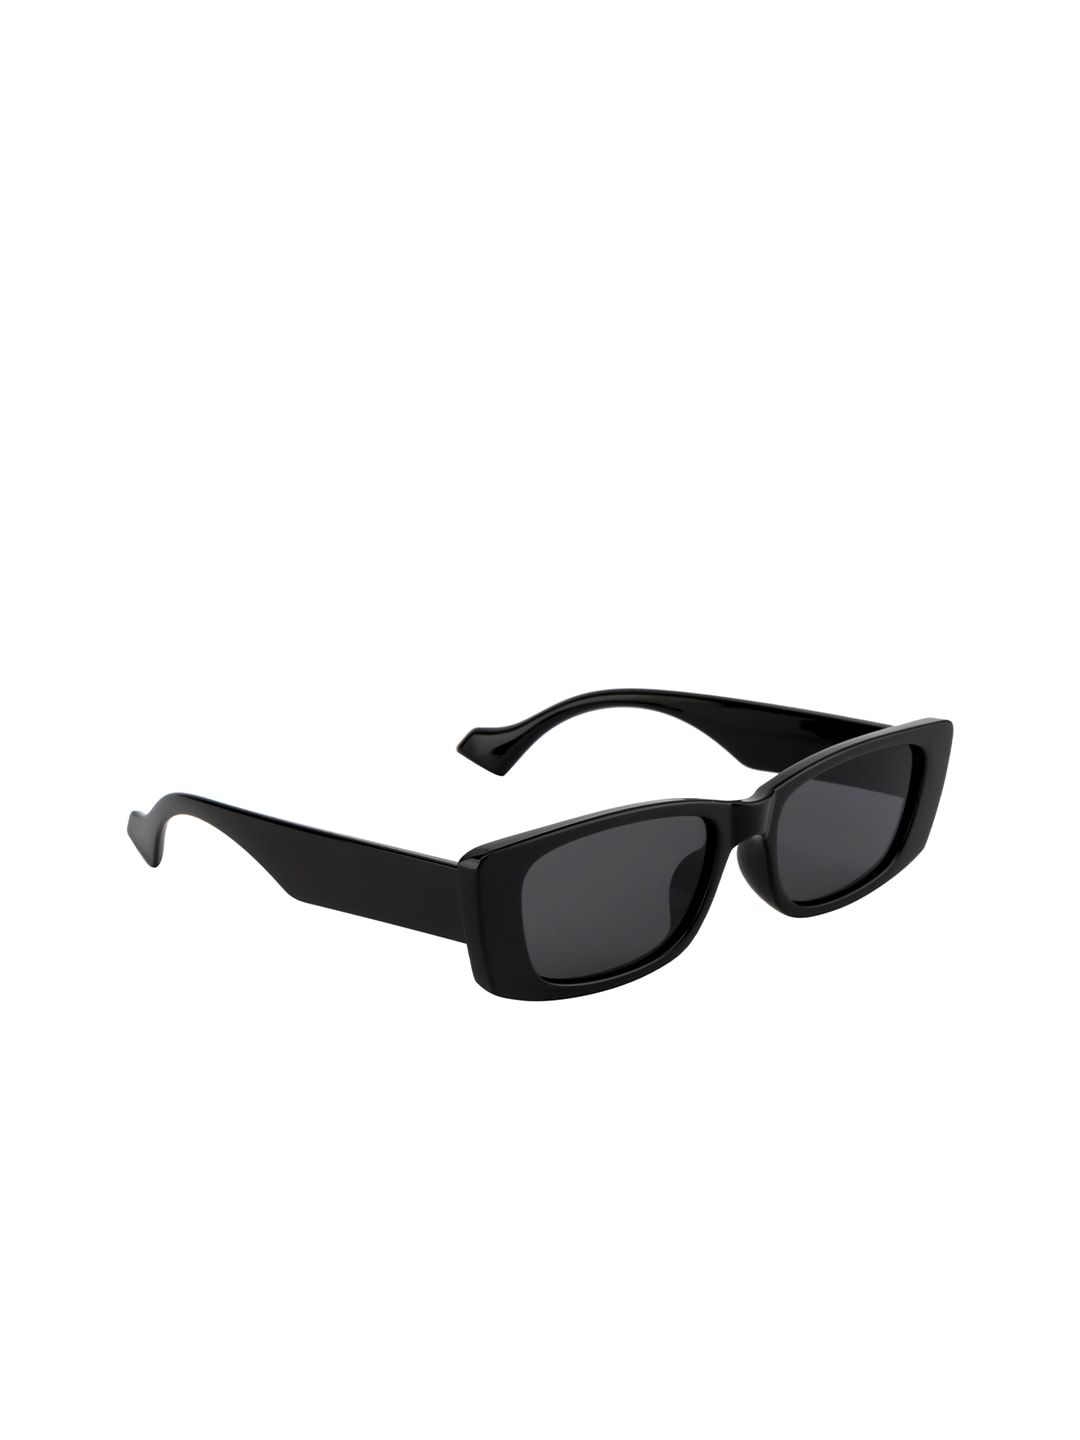 Ted Smith Unisex Grey Lens & Black Rectangle Sunglasses TS-CHOCOEYE_BLK Price in India